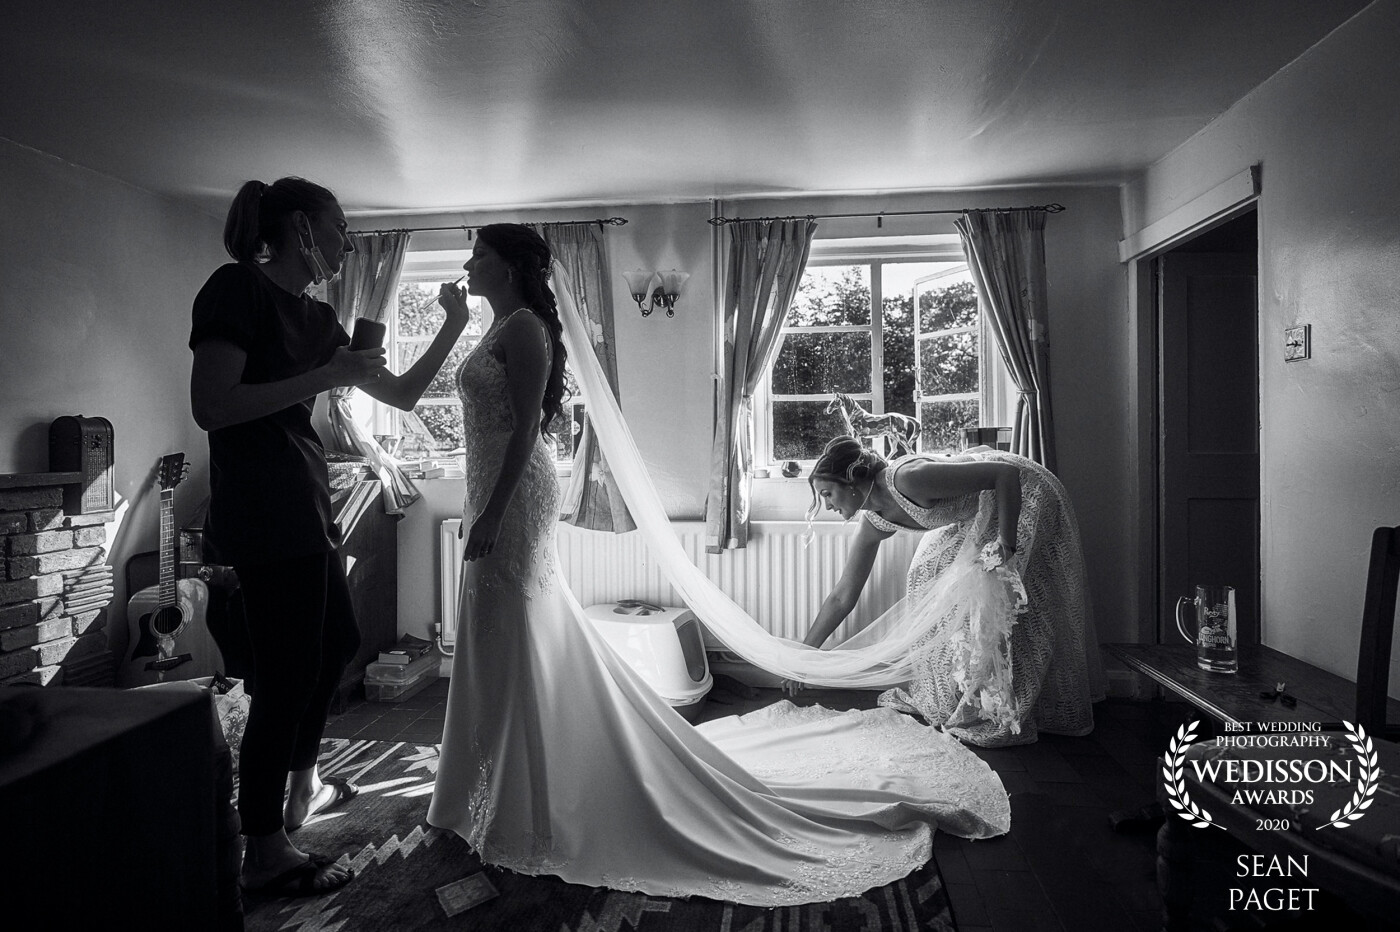 This was a beautiful moment of calm just before Natalie's and Mat's wedding earlier this year. Emily the wonderful bridesmaid quickly giving  Natalie's dress and veil a last-minute check before heading off to the church. 